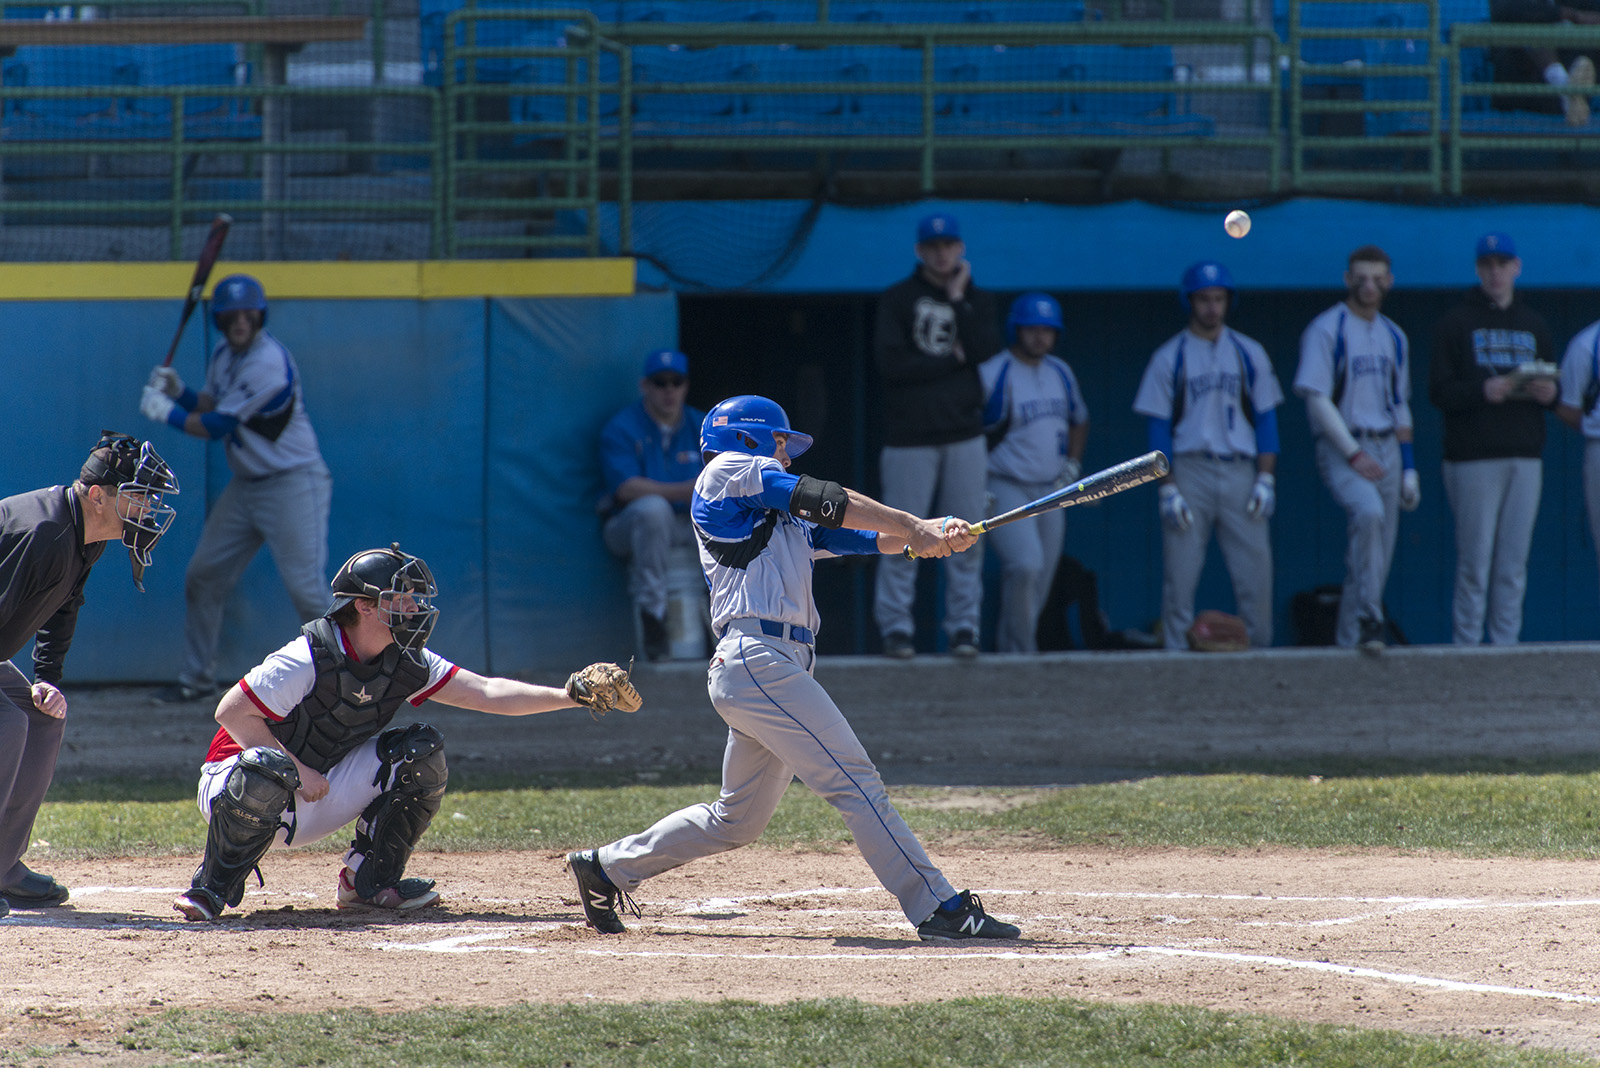 A KCC baseball player bats against Lake Michigan College at C.O. Brown Stadium in Battle Creek on April 12, 2018.